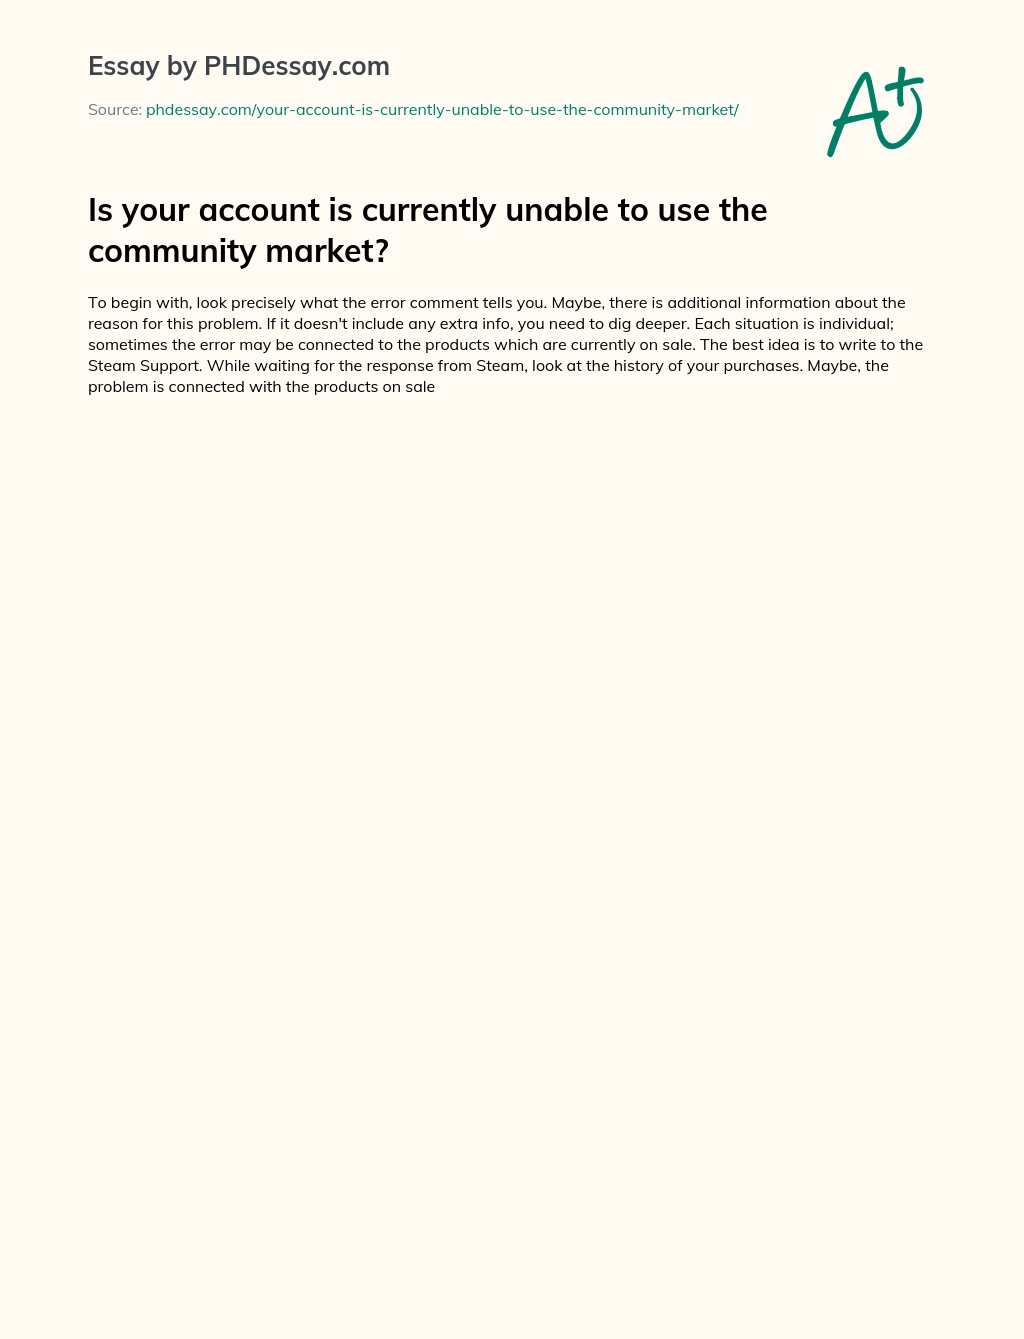 Is your account is currently unable to use the community market? essay